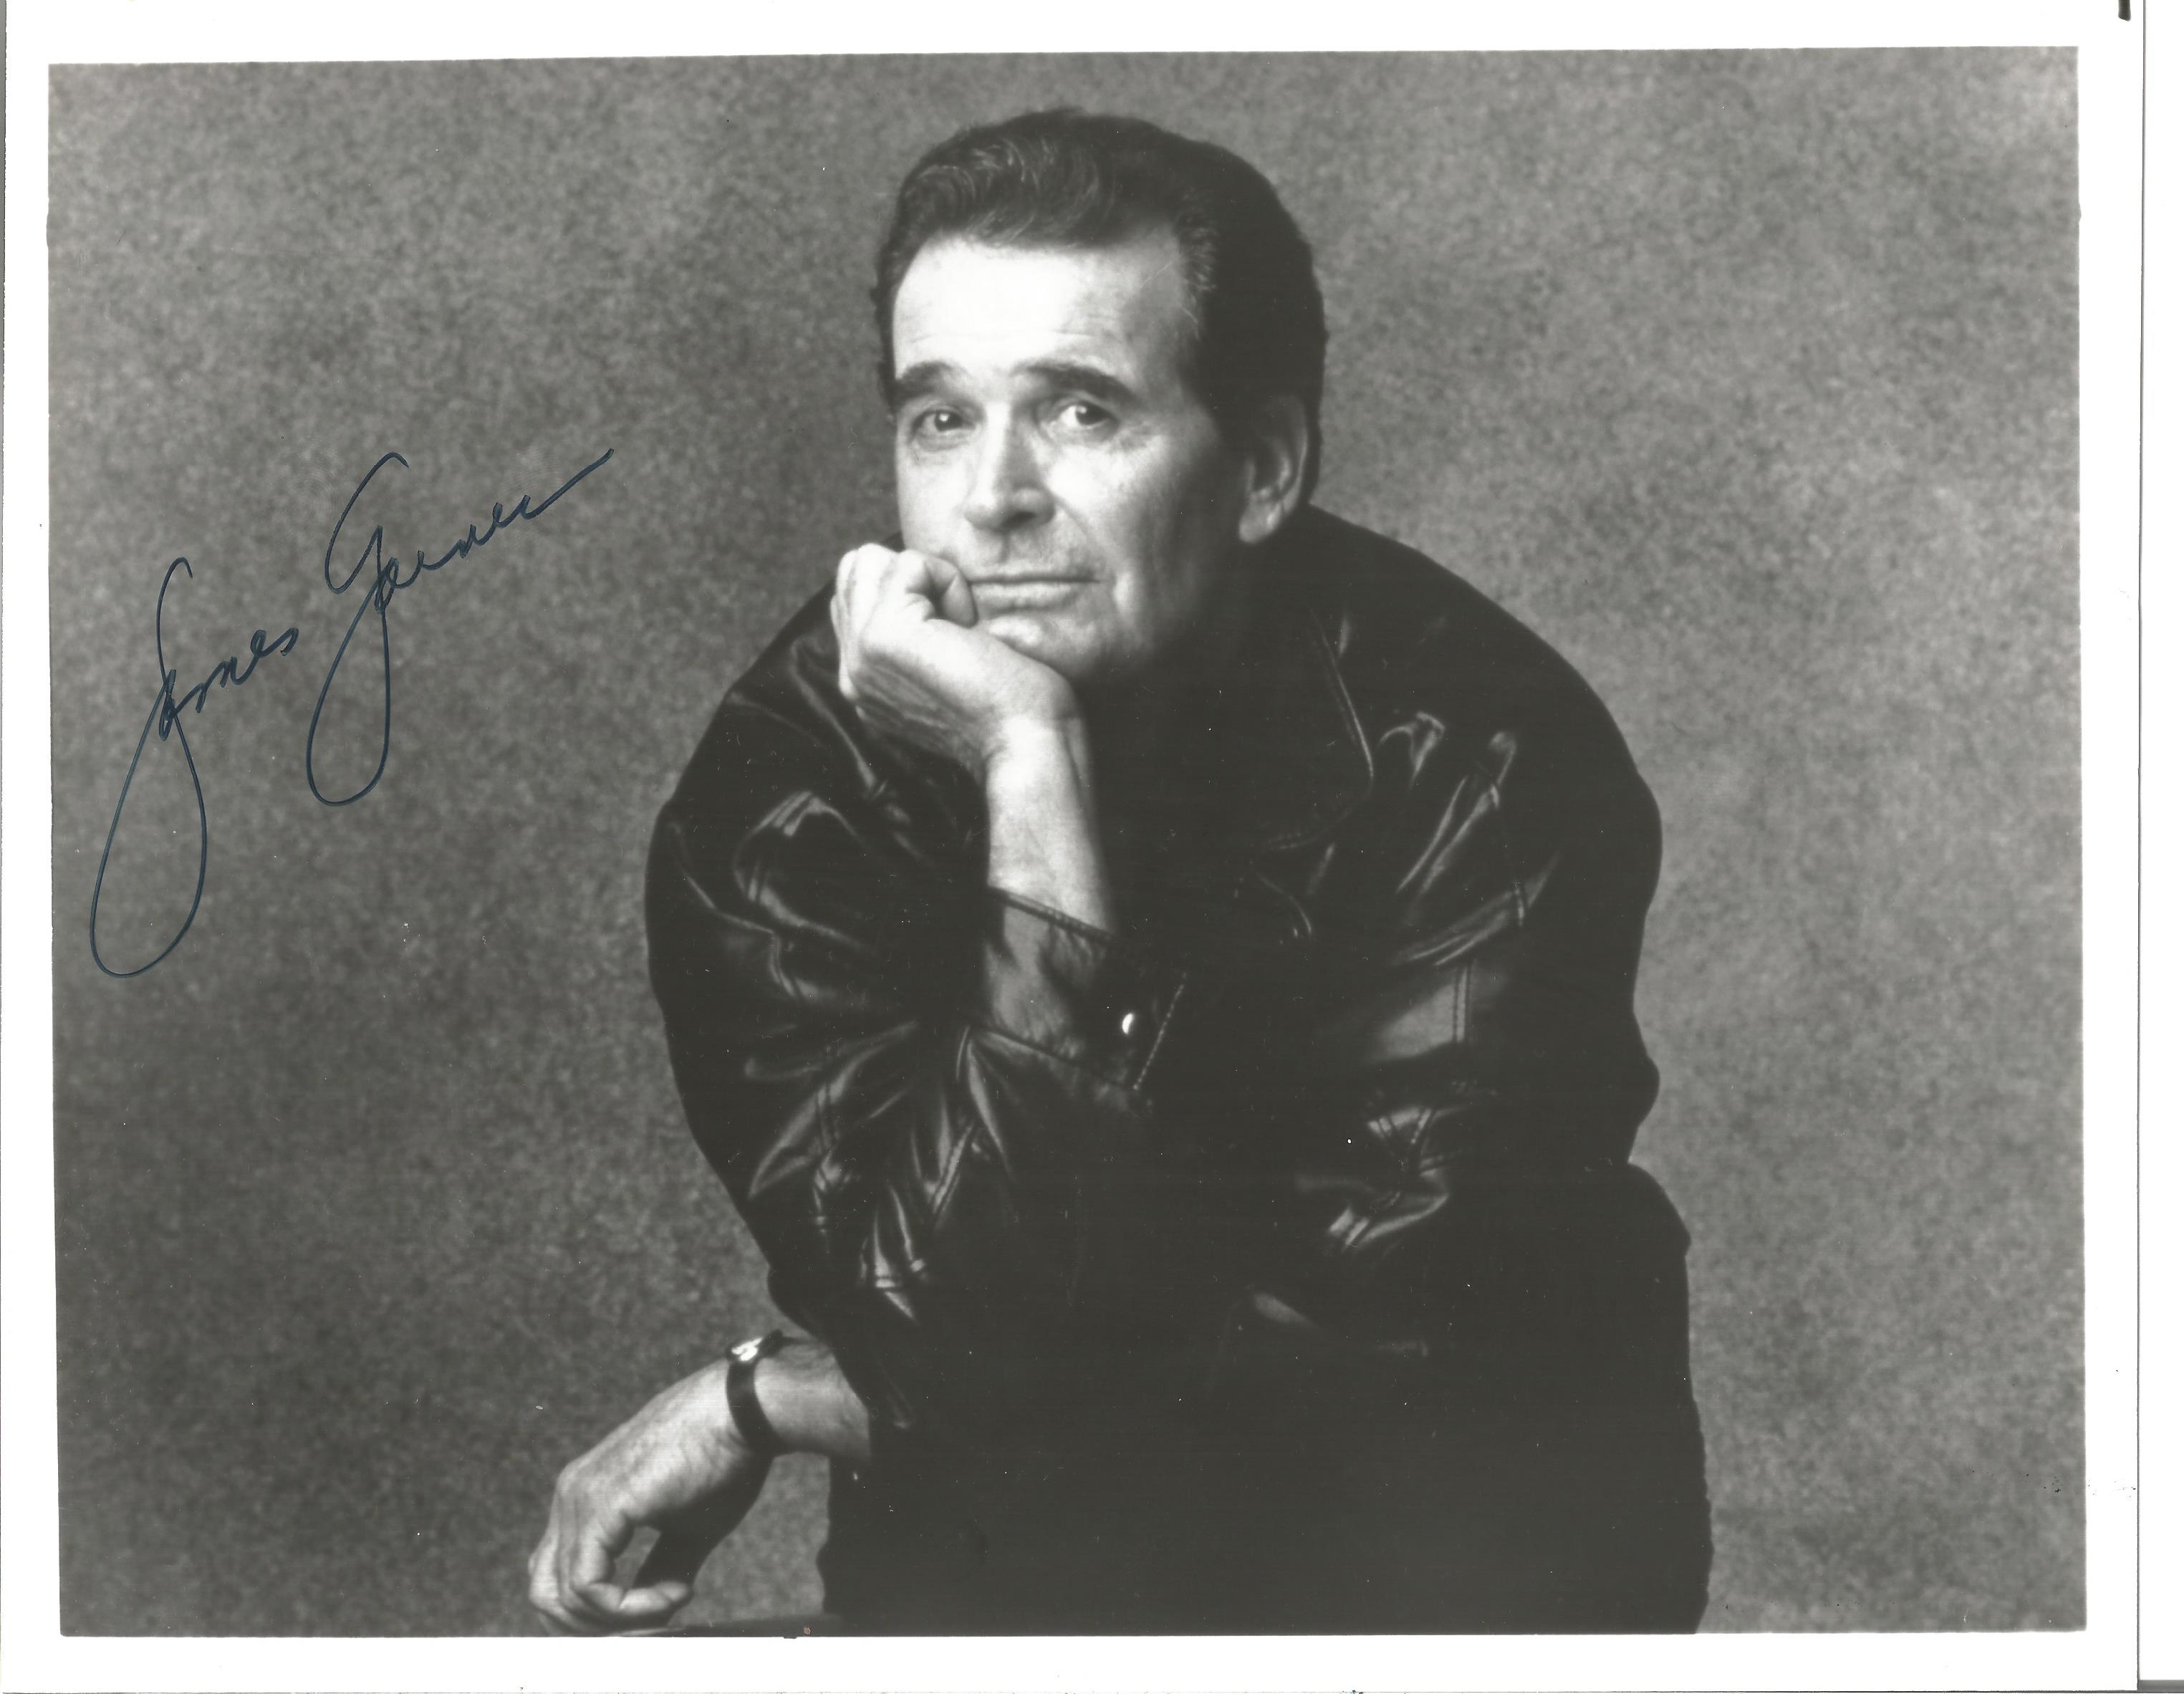 James Garner signed 10x8 inch black and white photo. Good condition. All autographs come with a